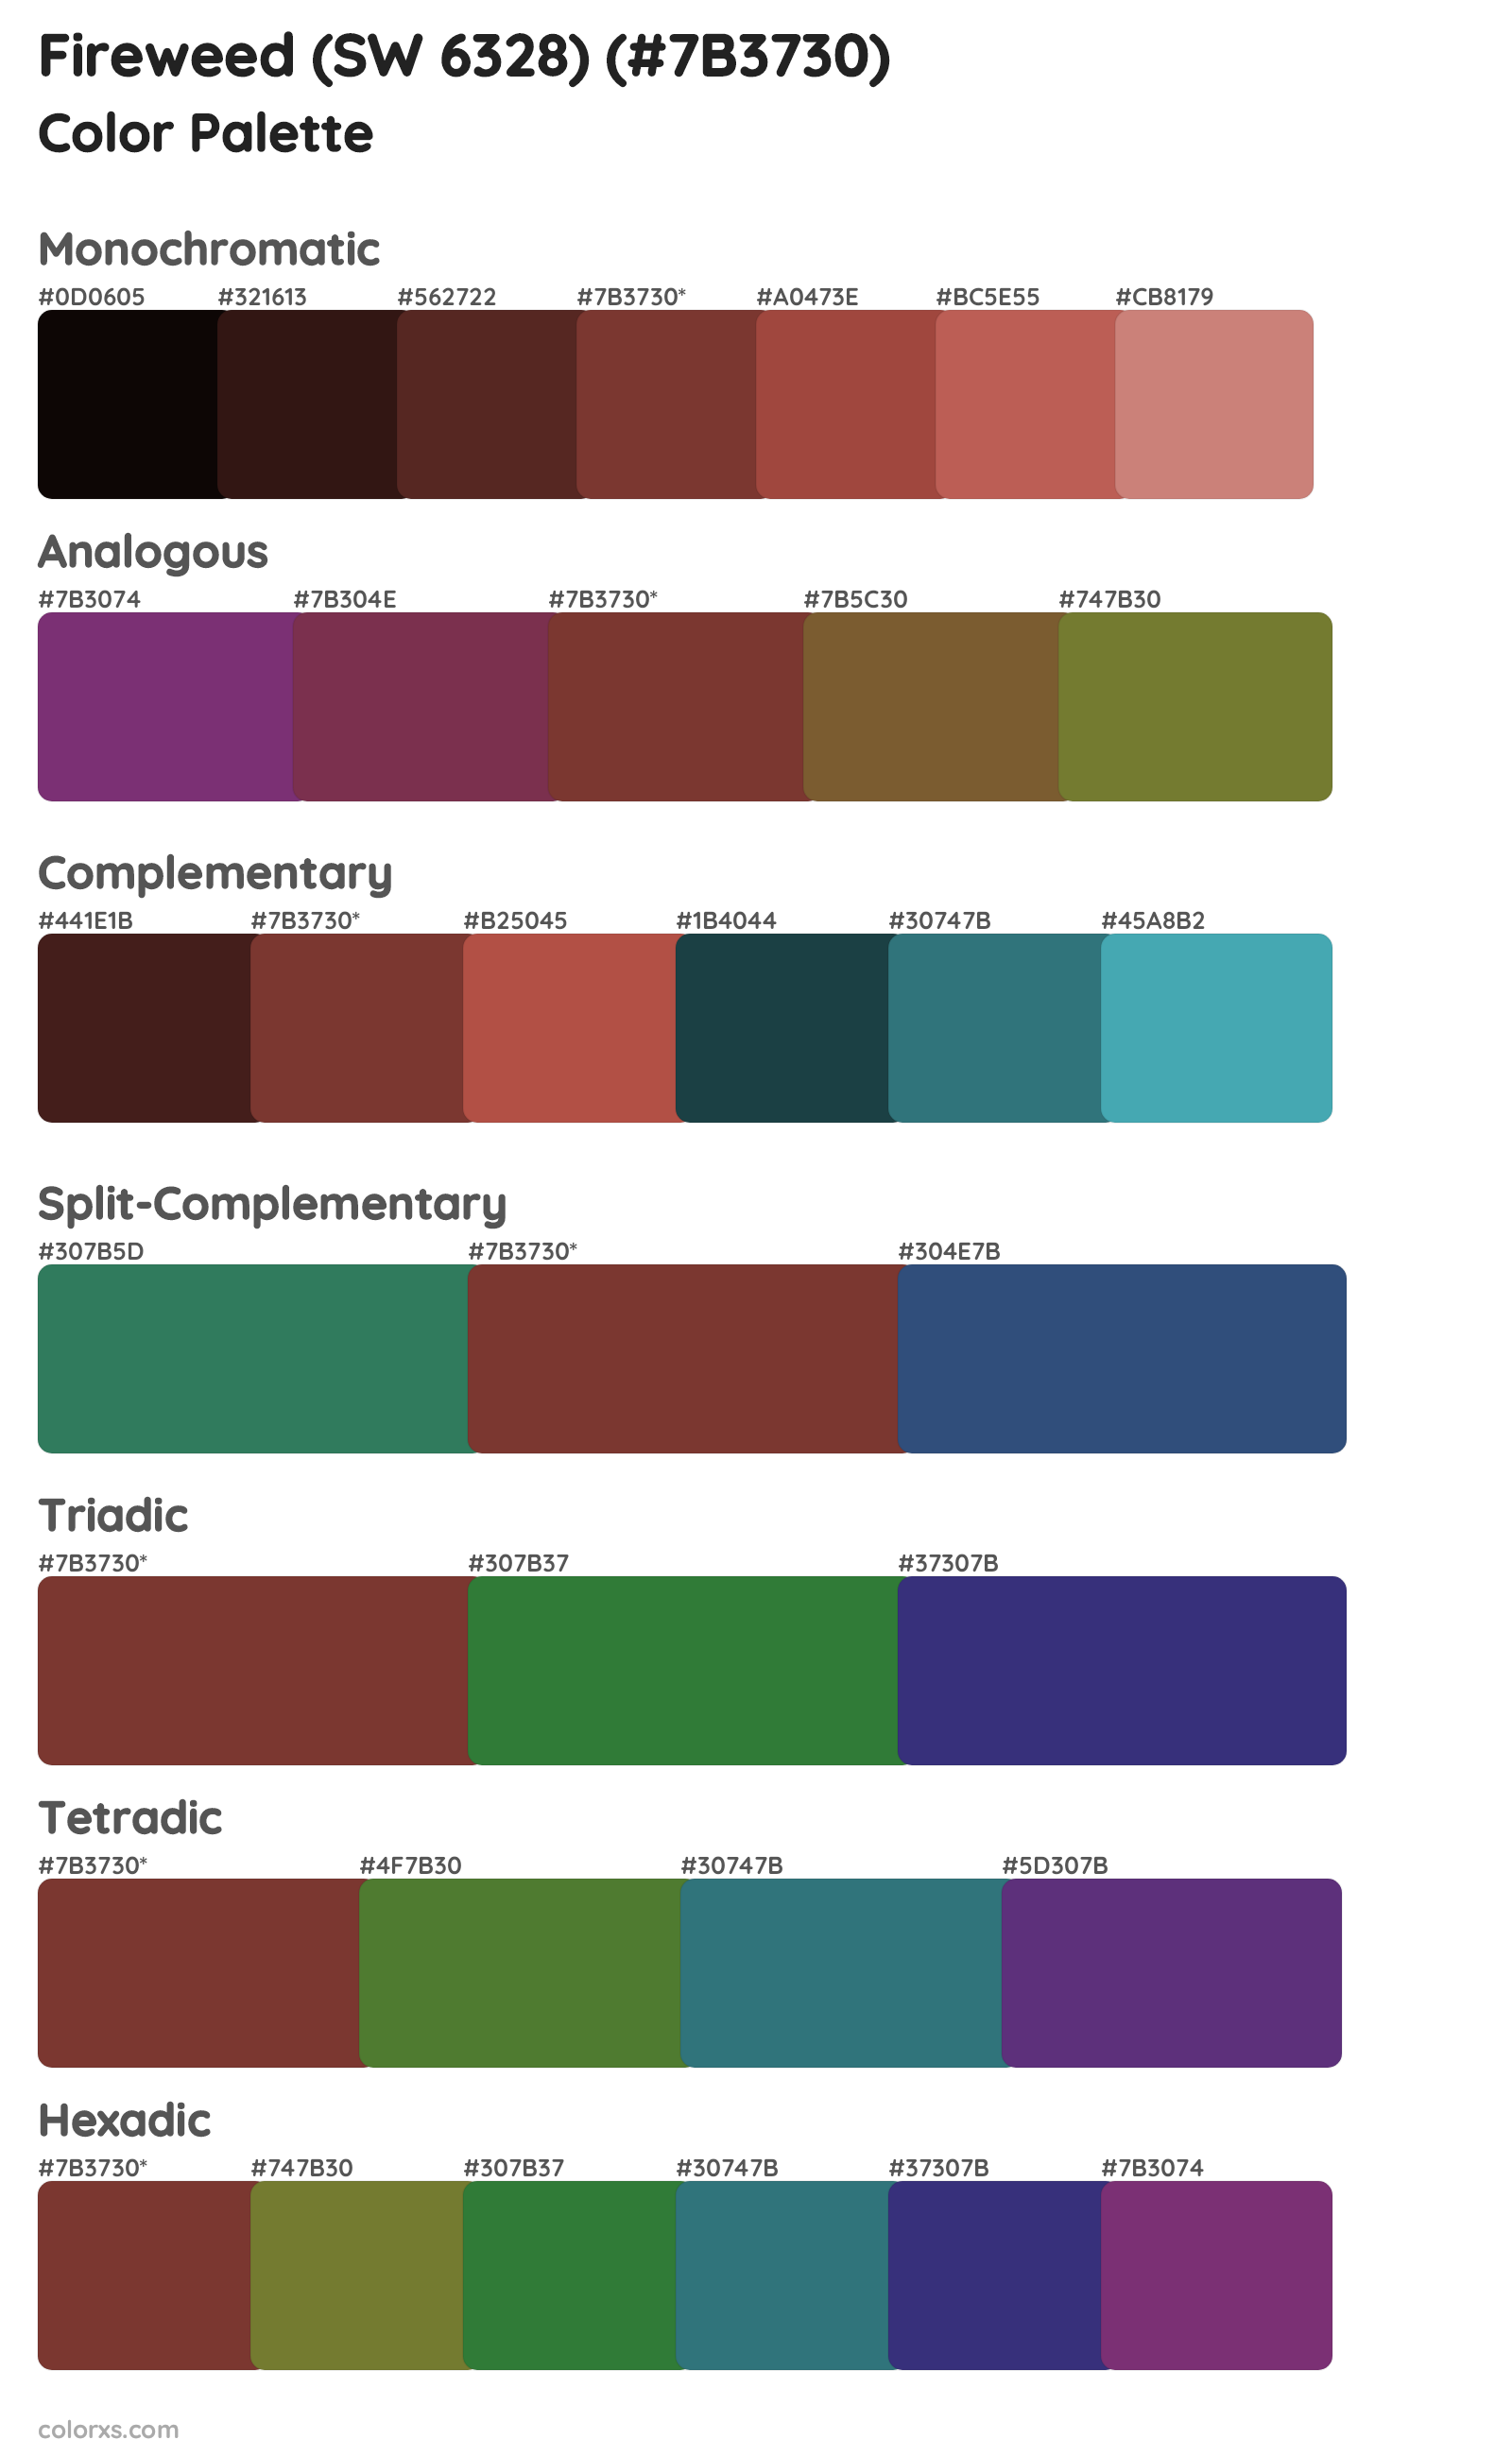 Fireweed (SW 6328) Color Scheme Palettes